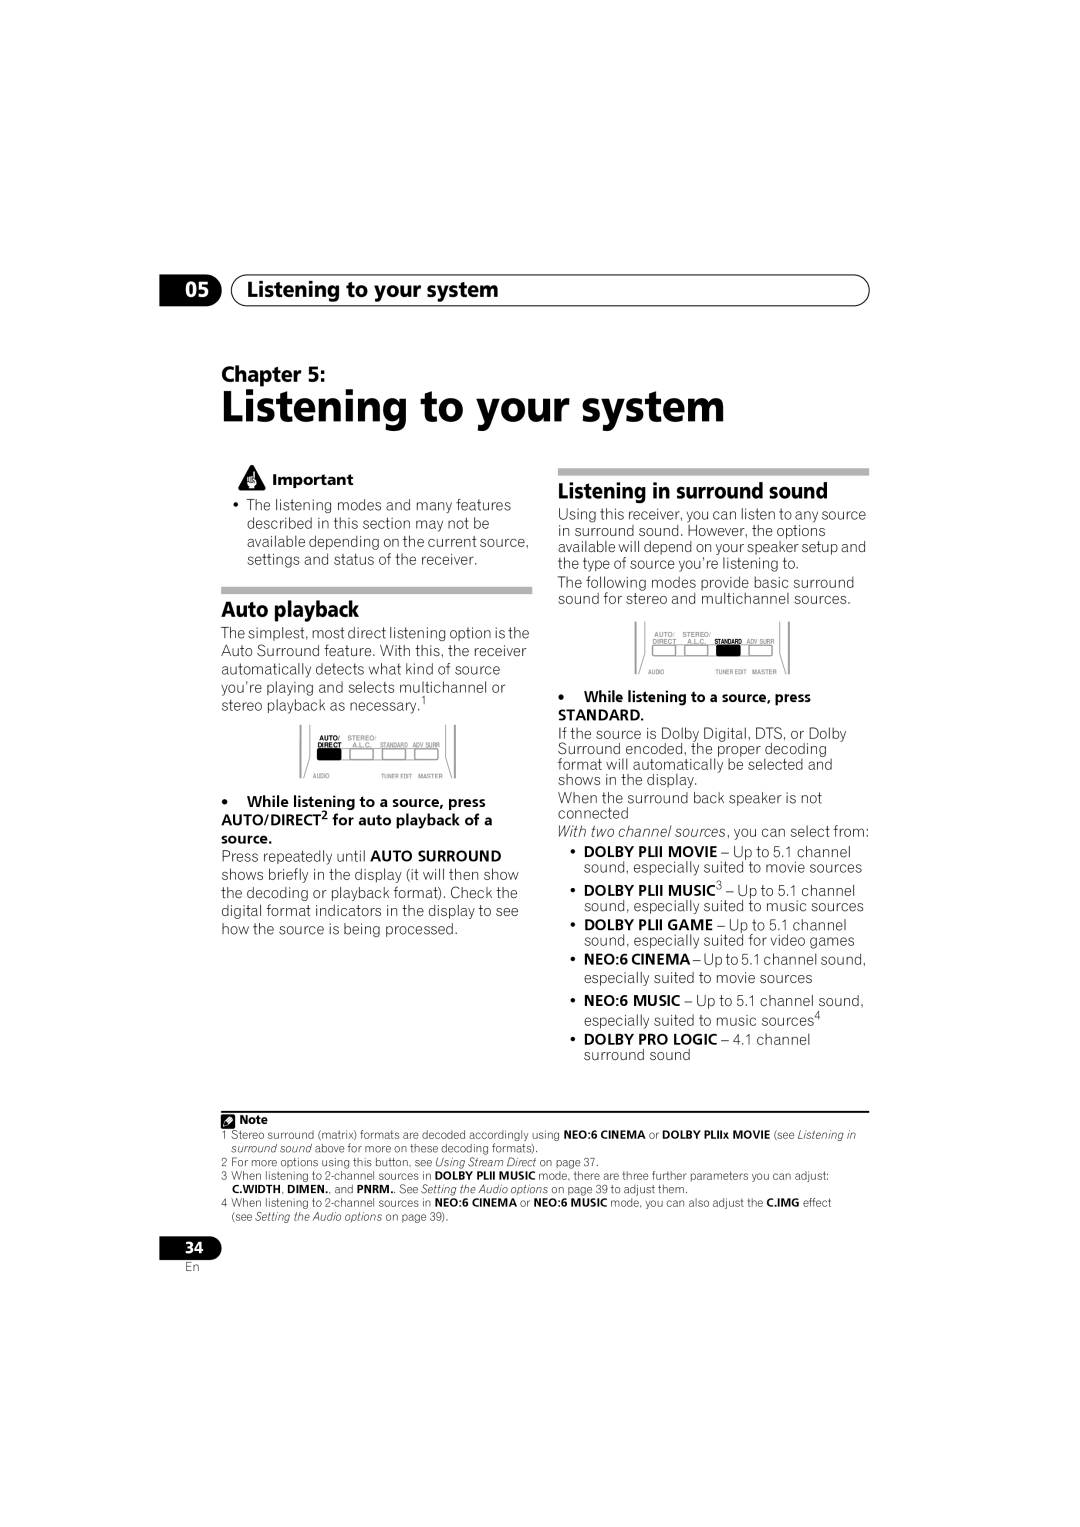 Pioneer VSX-819H-S manual 05Listening to your system Chapter, Auto playback, Listening in surround sound 